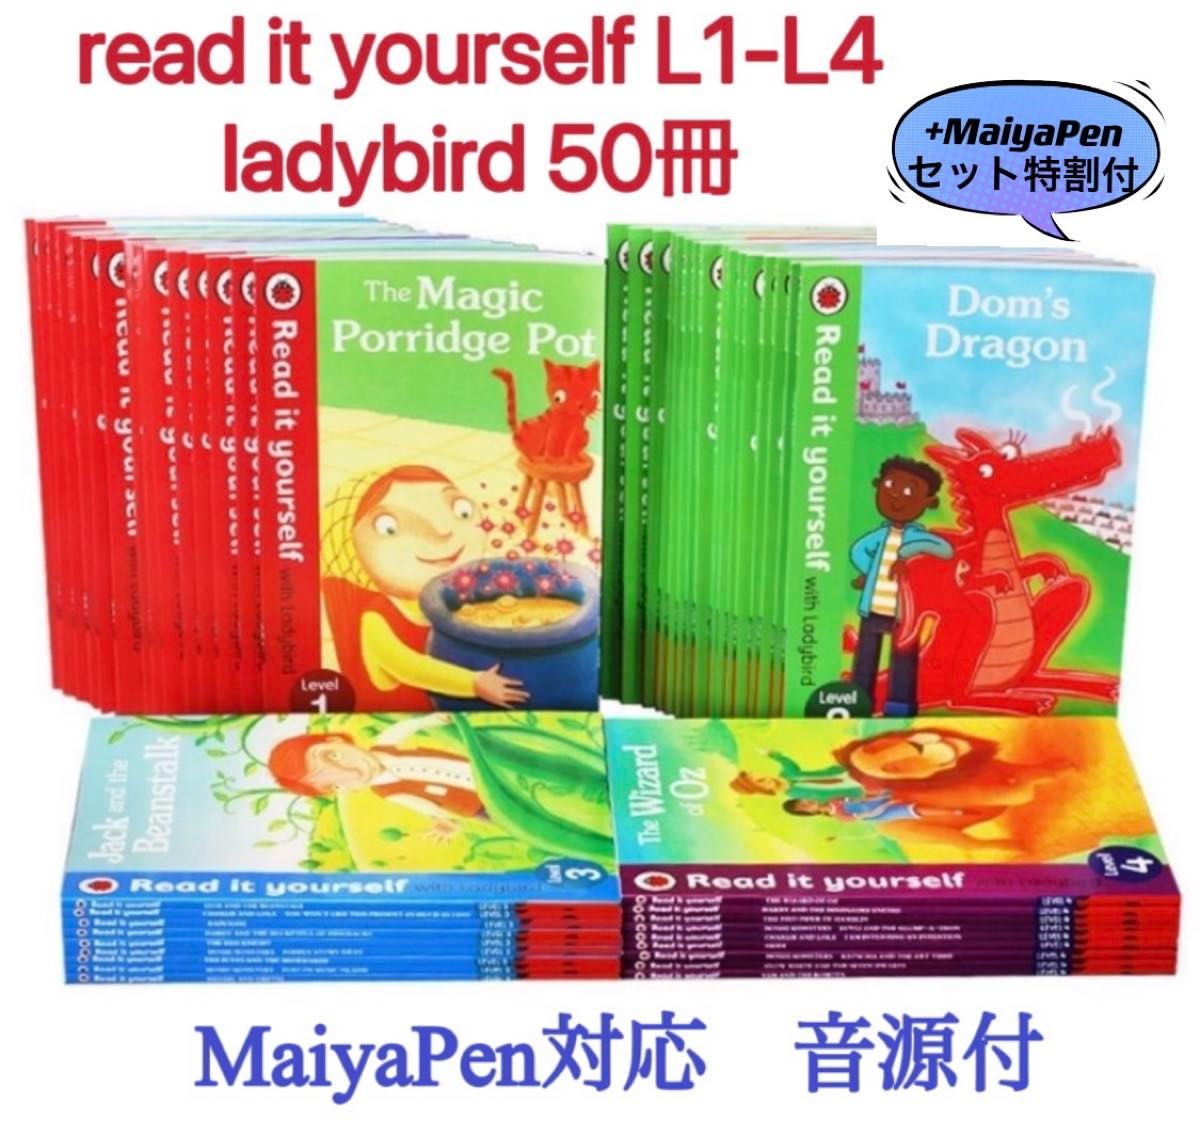 read it yourself 50冊 マイヤペン対応 多読 maiyapen ladybird ステップバイステップ 読聞かせ